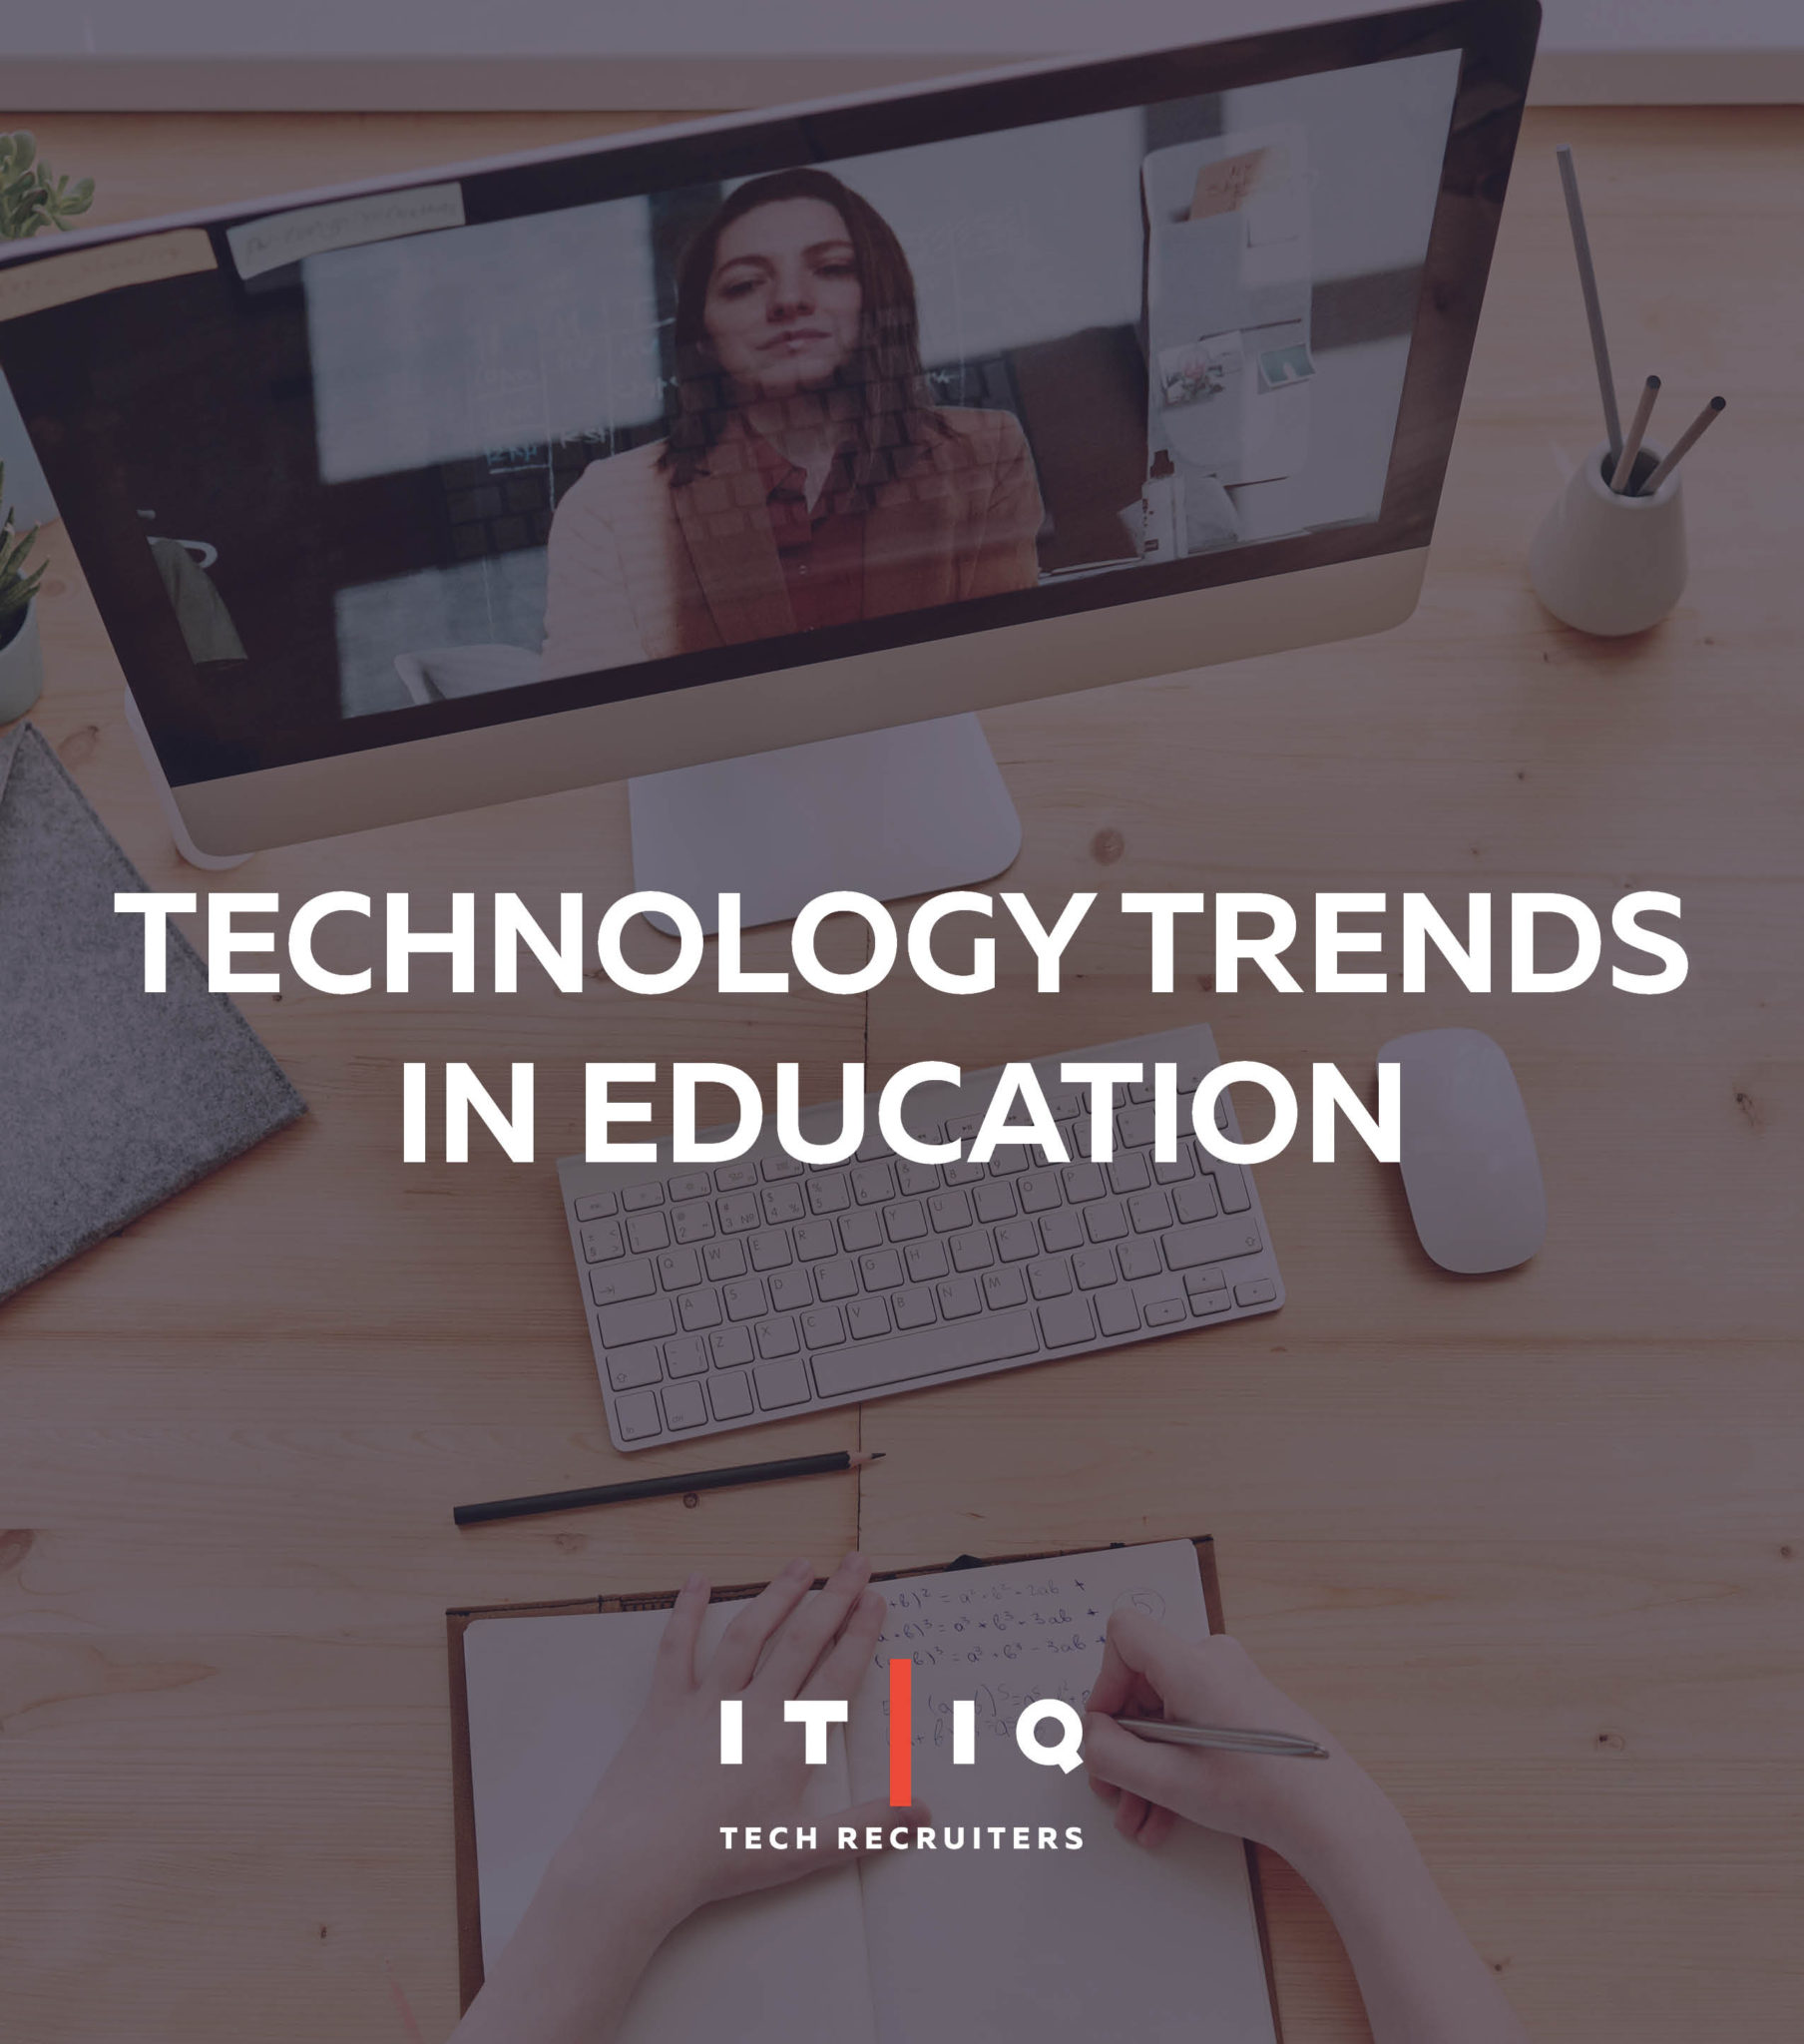 IT/IQ Tech Recruiters Technology Trends in Education Graphic